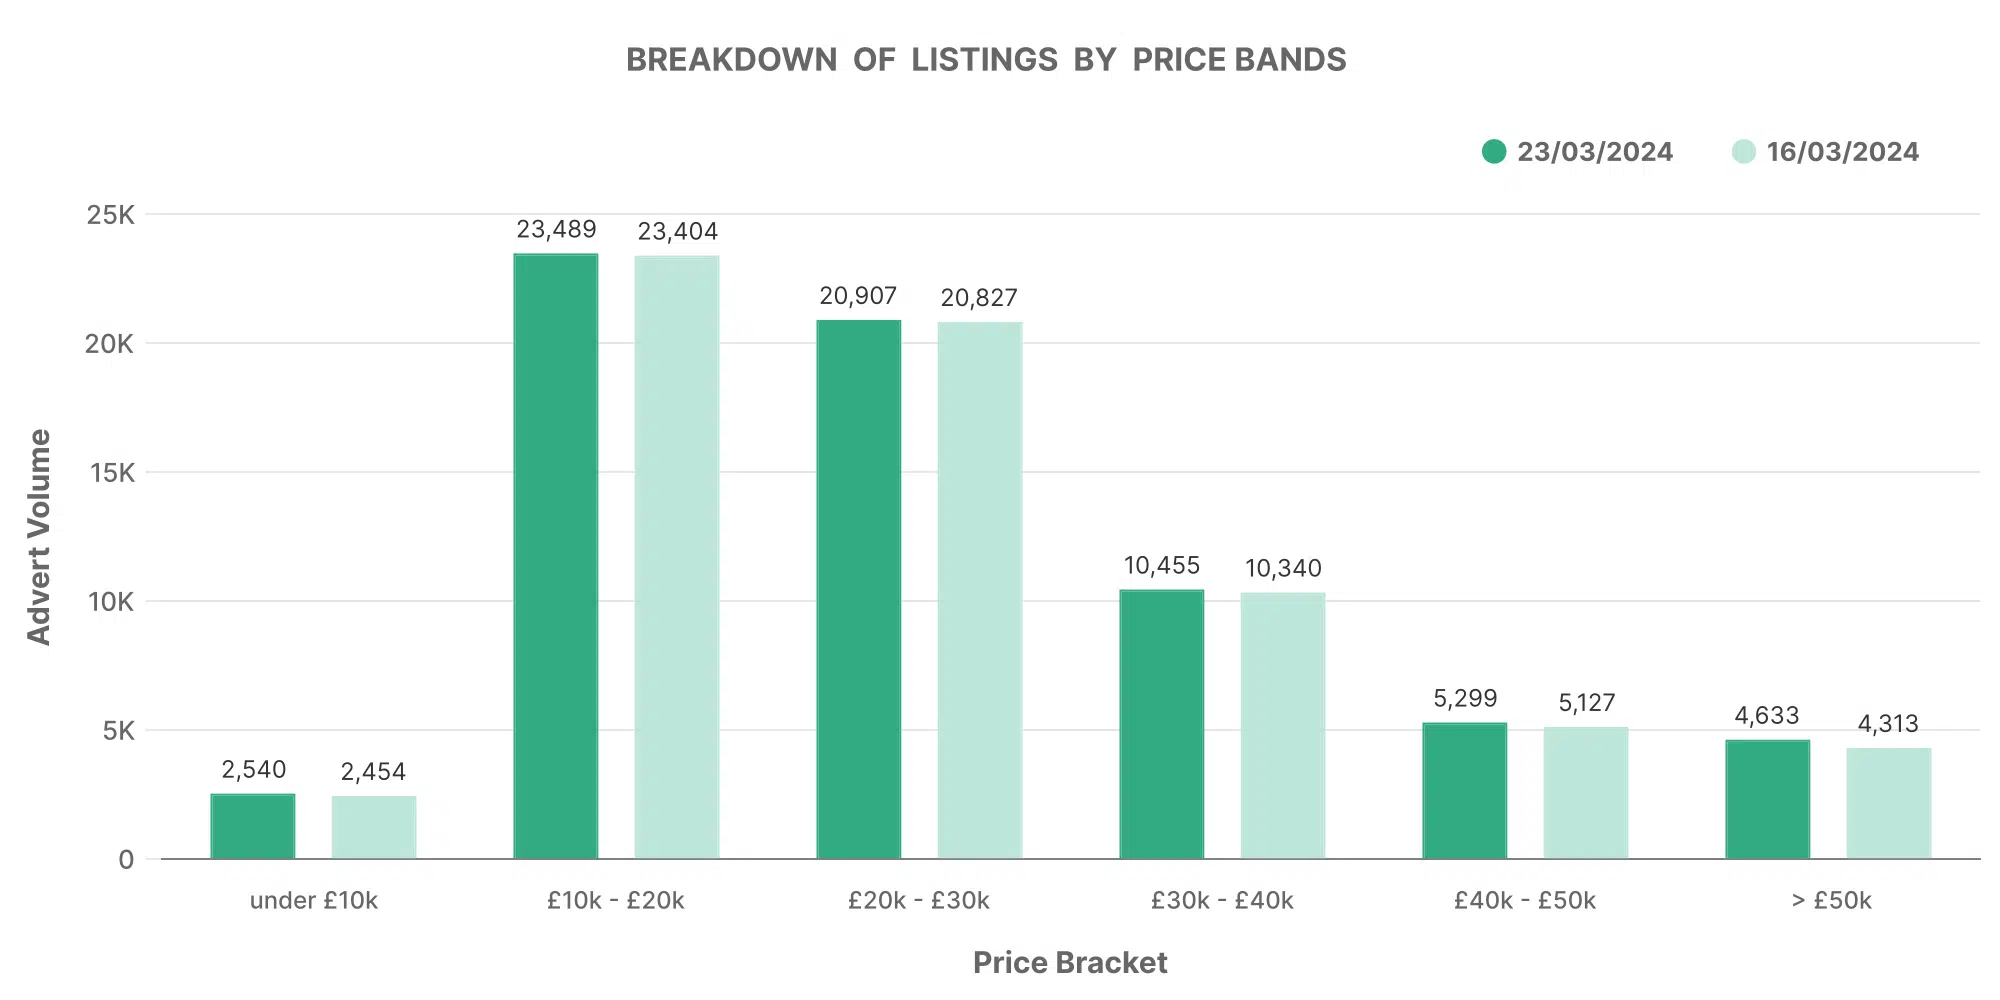 Electric car market graph showing breakdown of listings by price bands